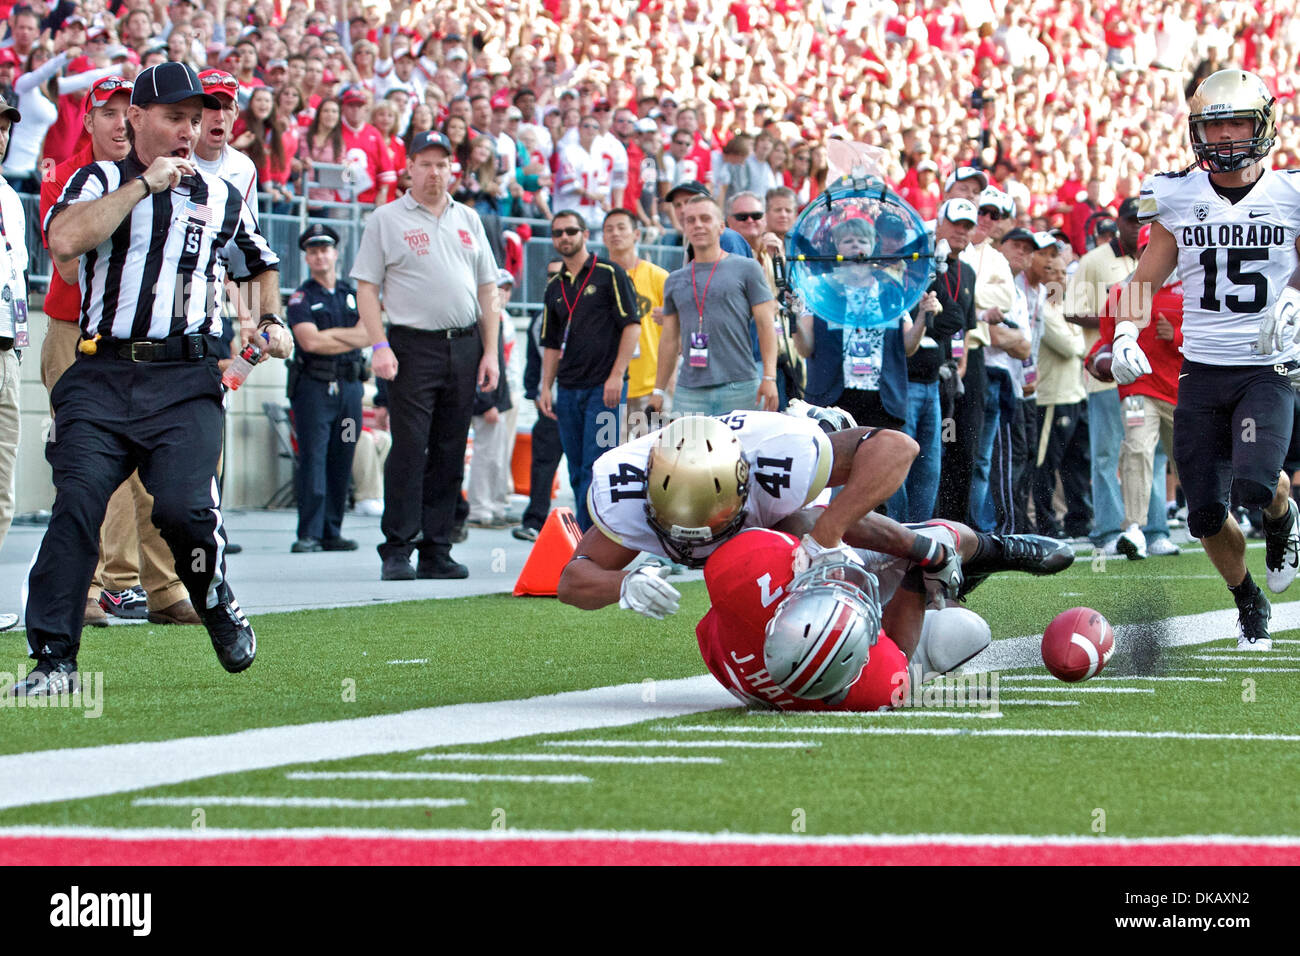 Sept. 24, 2011 - Columbus, Ohio, U.S - The ball is knocked loose after Ohio State Buckeyes running back Jordan Hall (7) is taken down by Colorado Buffaloes defensive back Terrel Smith (41) on a punt return in the third quarter of the game between Colorado and Ohio State at Ohio Stadium, Columbus, Ohio. Ohio State defeated Colorado 37-17. (Credit Image: © Scott Stuart/Southcreek Glo Stock Photo